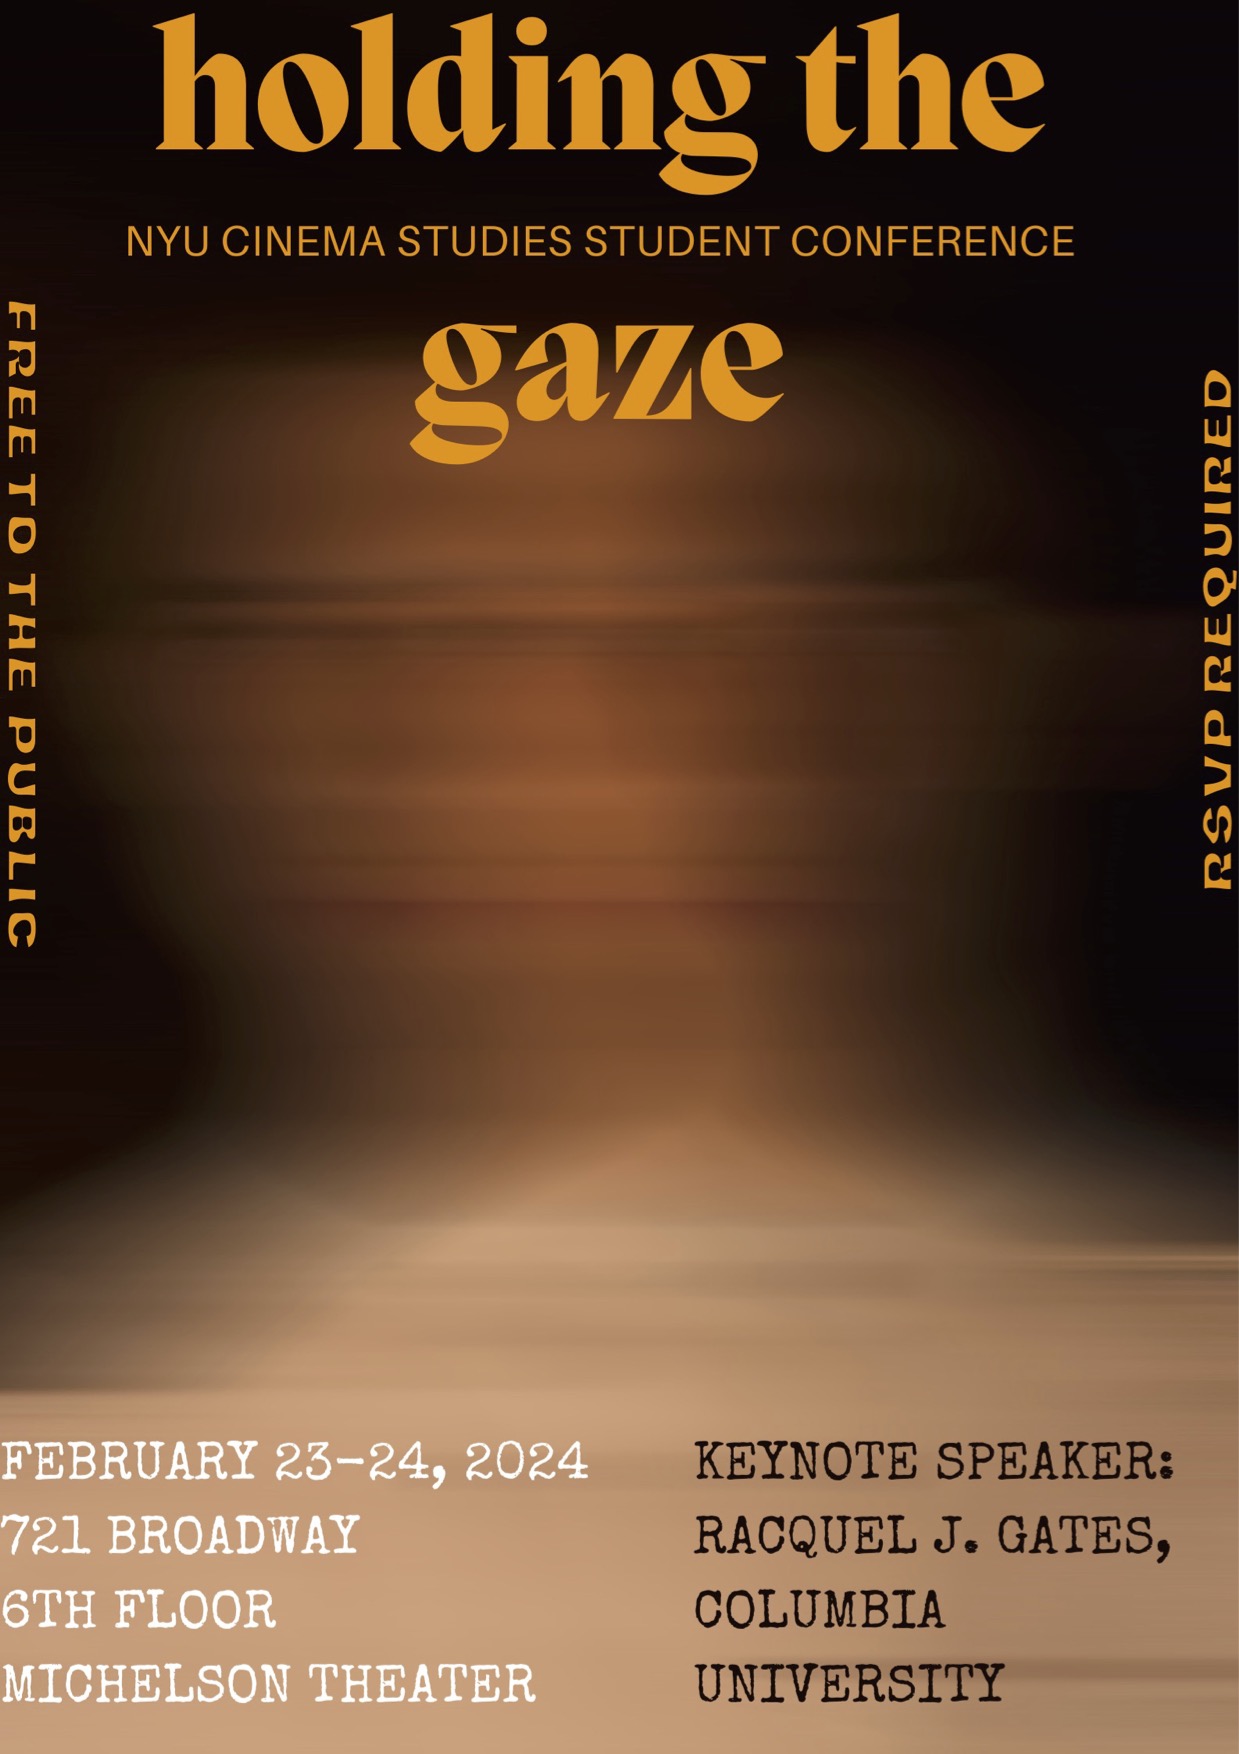 Poster for holding the gaze conference